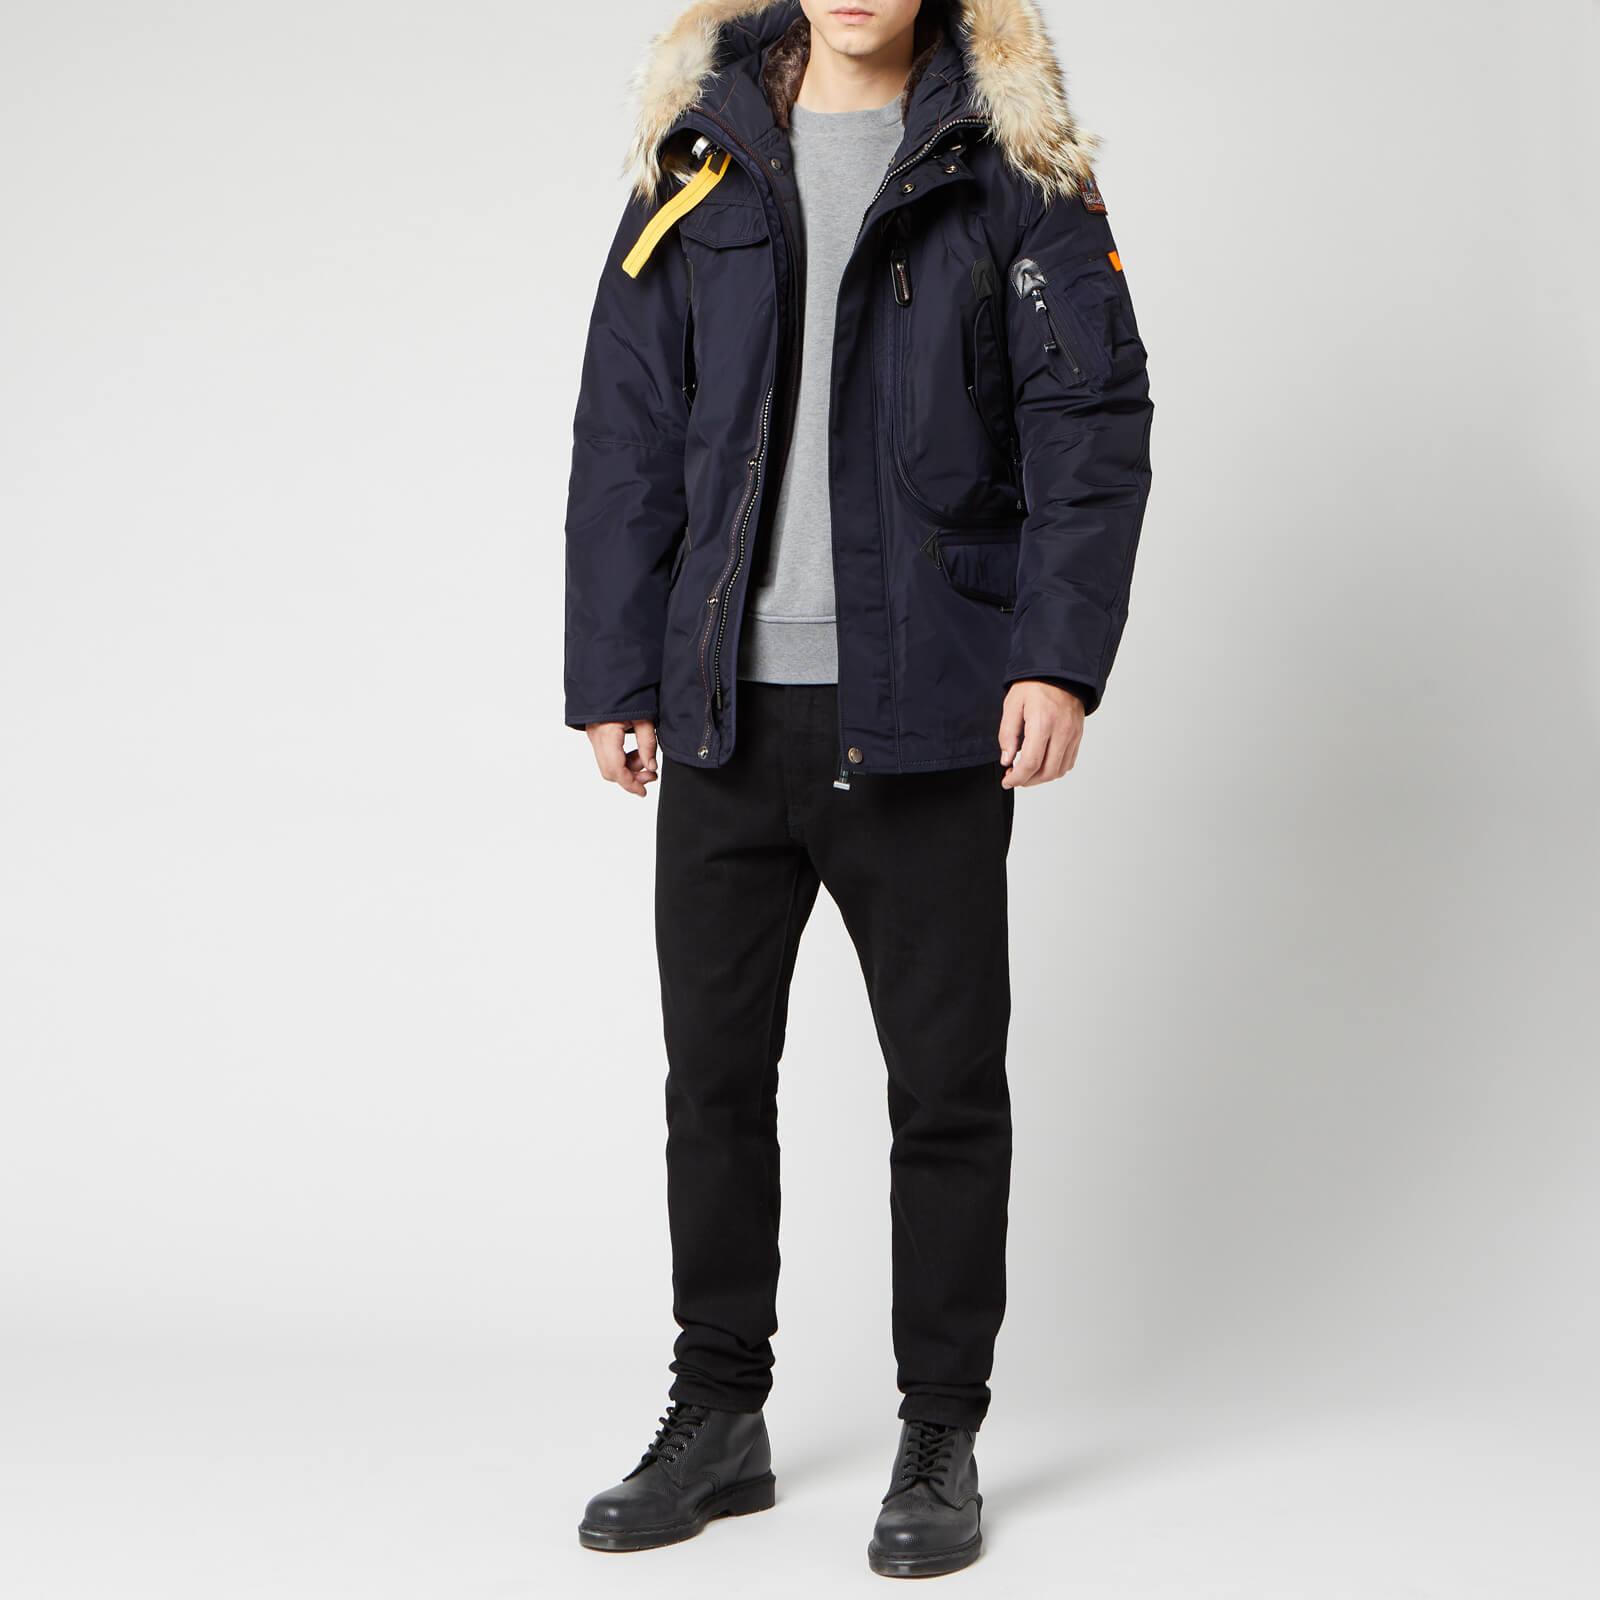 Parajumpers Right Hand Jacket in Navy Blue (Blue) for Men - Lyst